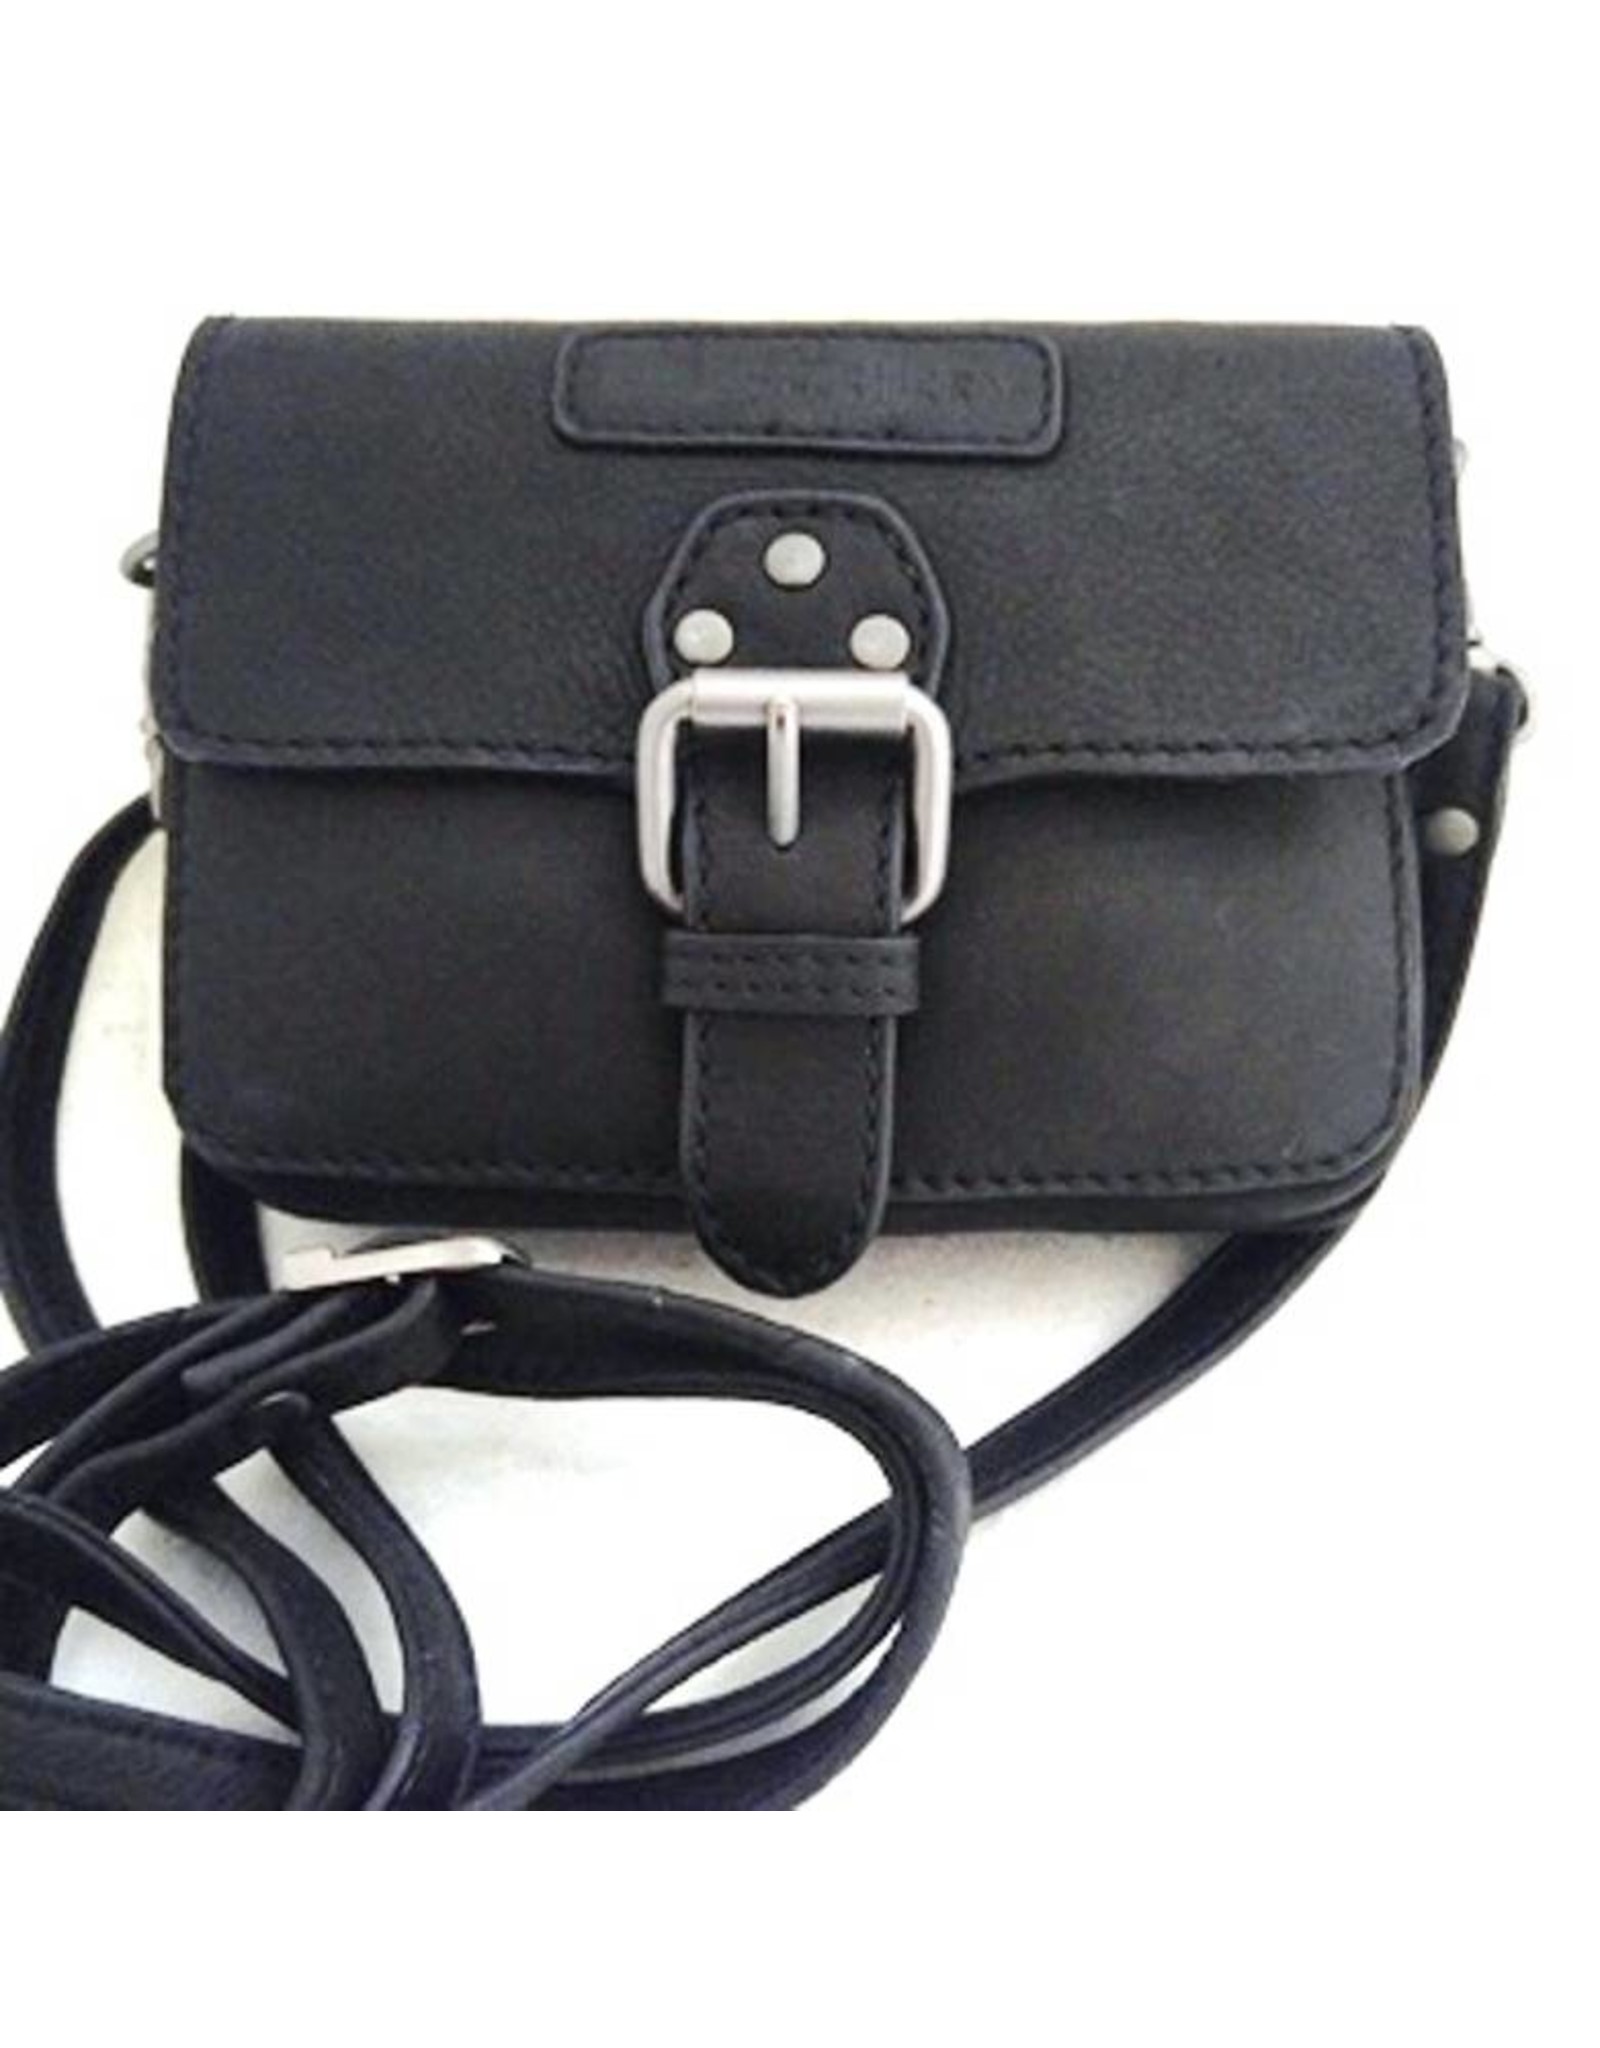 HillBurry Leather bags - HillBurry Leather Shoulder bag 3280zw